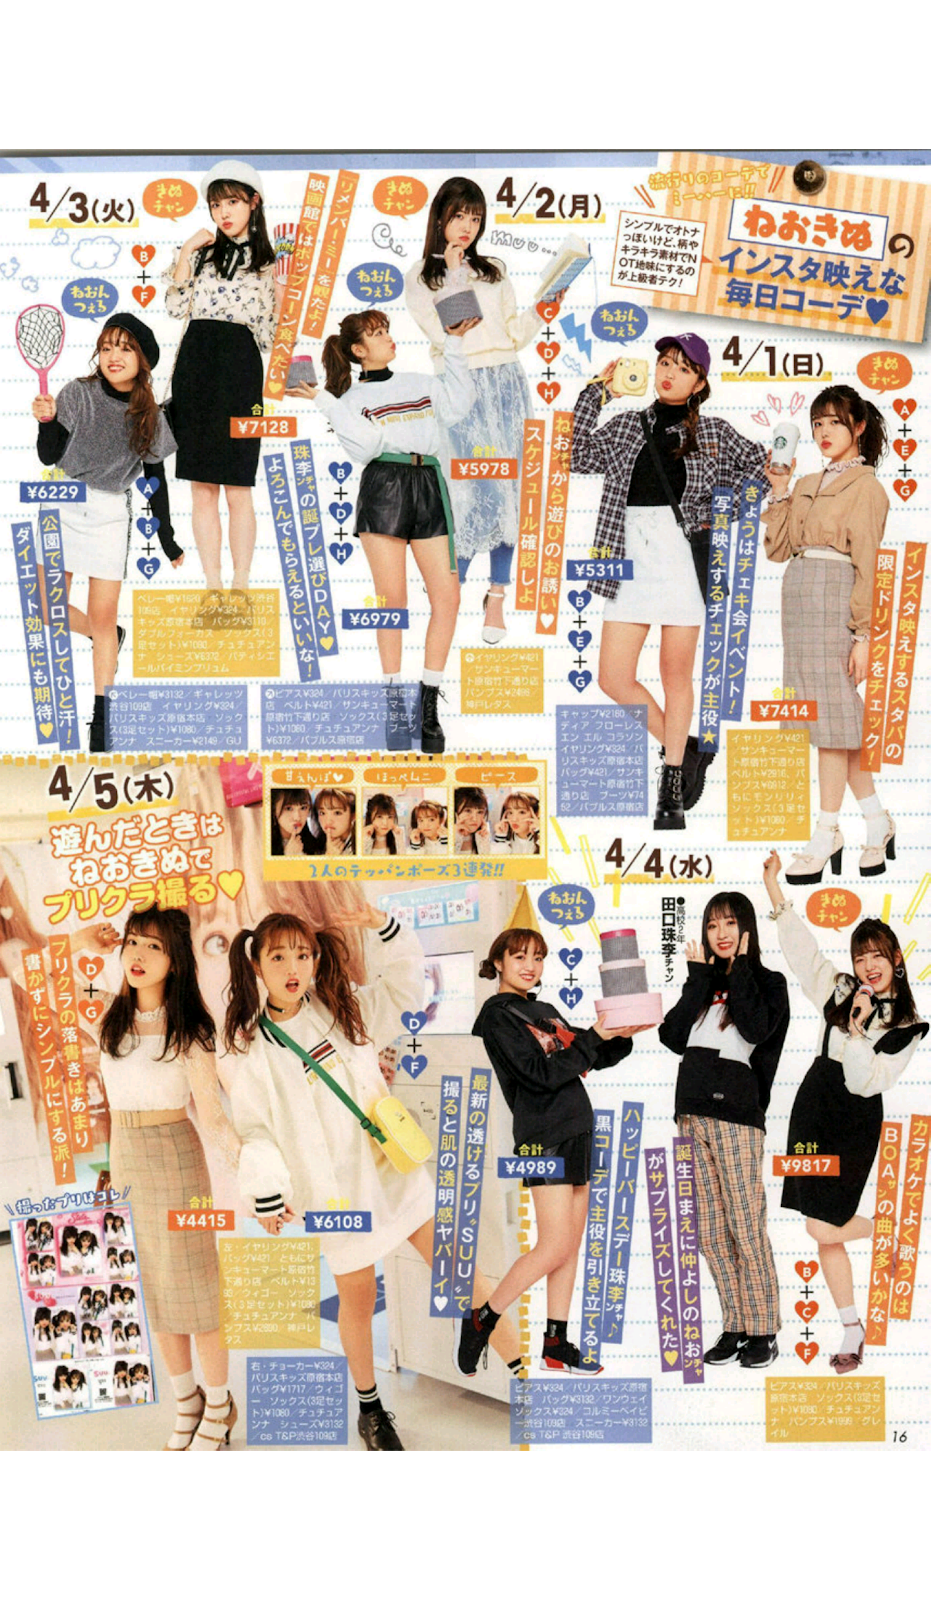 Popteen May 2018 Issue [Japanese Magazine Scans] - Beauty by Rayne